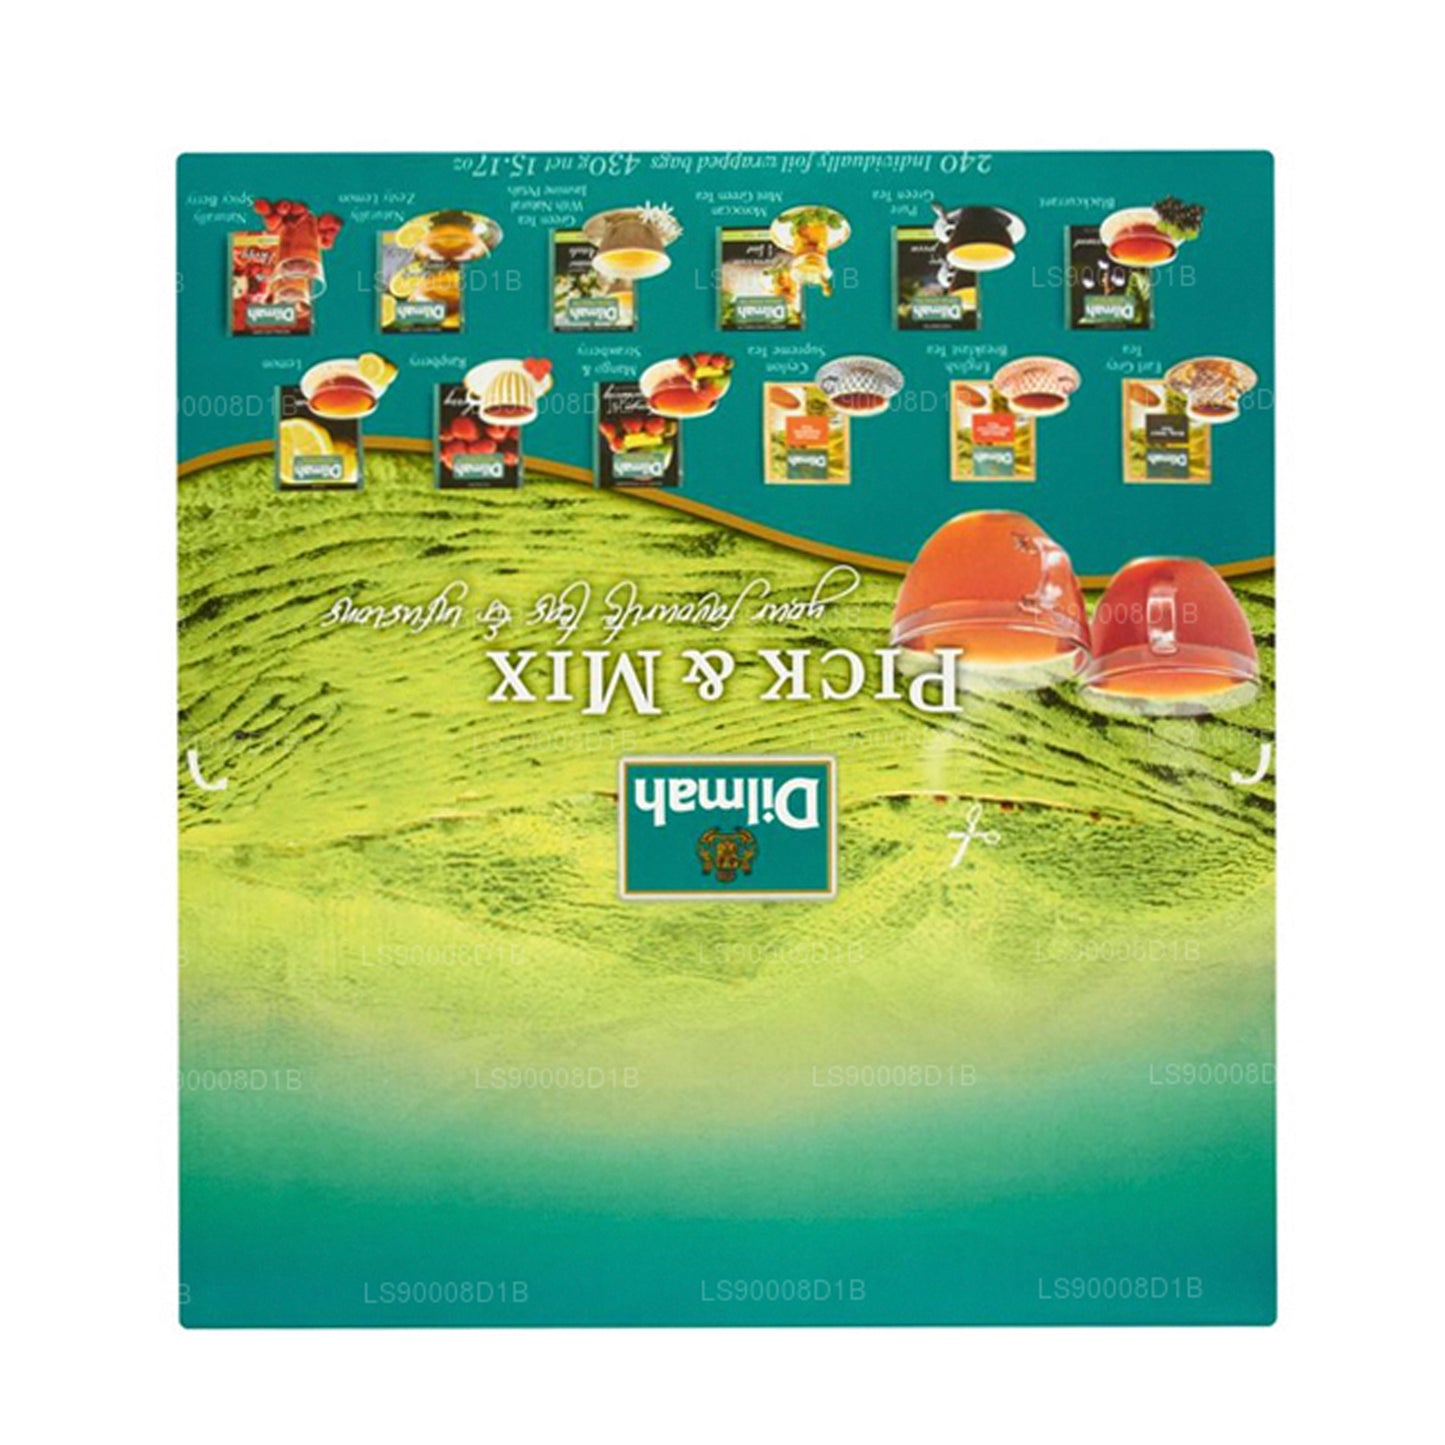 Dilmah Pick and Mix (430g) 240 Tea Bags